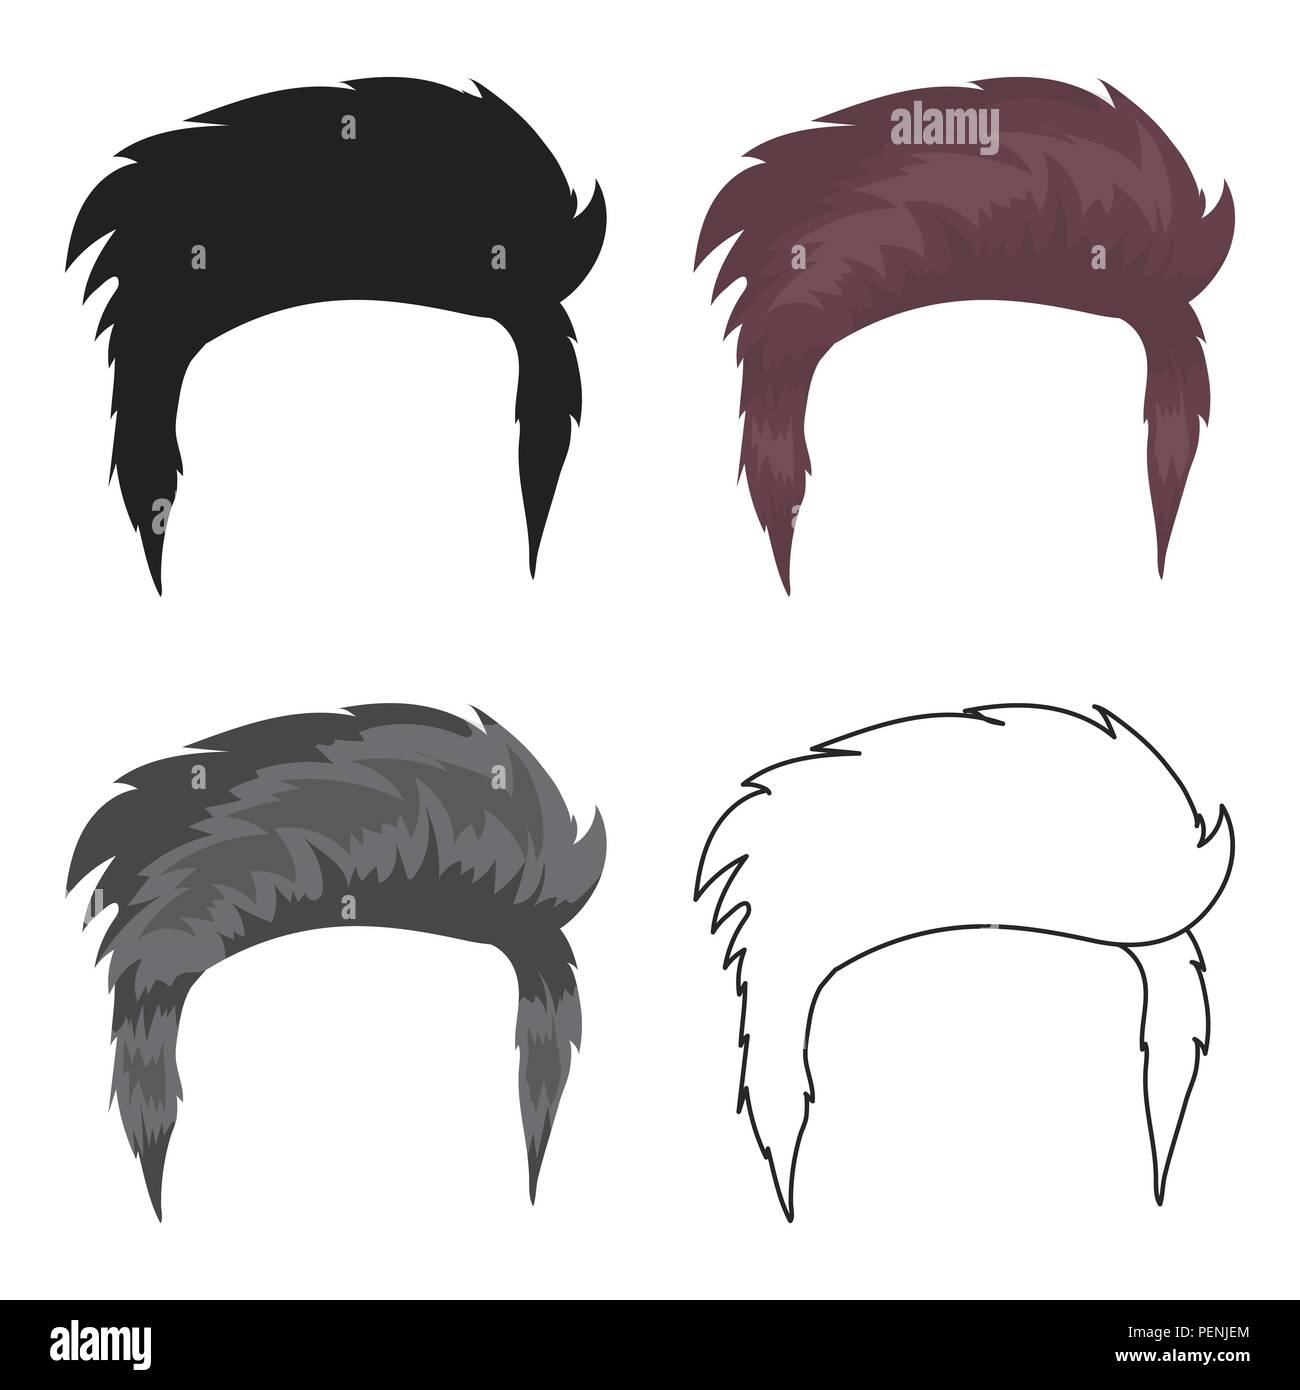 afro,art,barbershop,beauty,brown,cartoon,comb,design,fashion,graphic,gray, hair ,haircut,hairdo,hairdresser,hairstyle,head,hipster,icon,illustration,isolated,logo,male,men,mohawk,over,pompadour,retro,salon,short,silhouette,style, symbol,vector,web, Vector ...